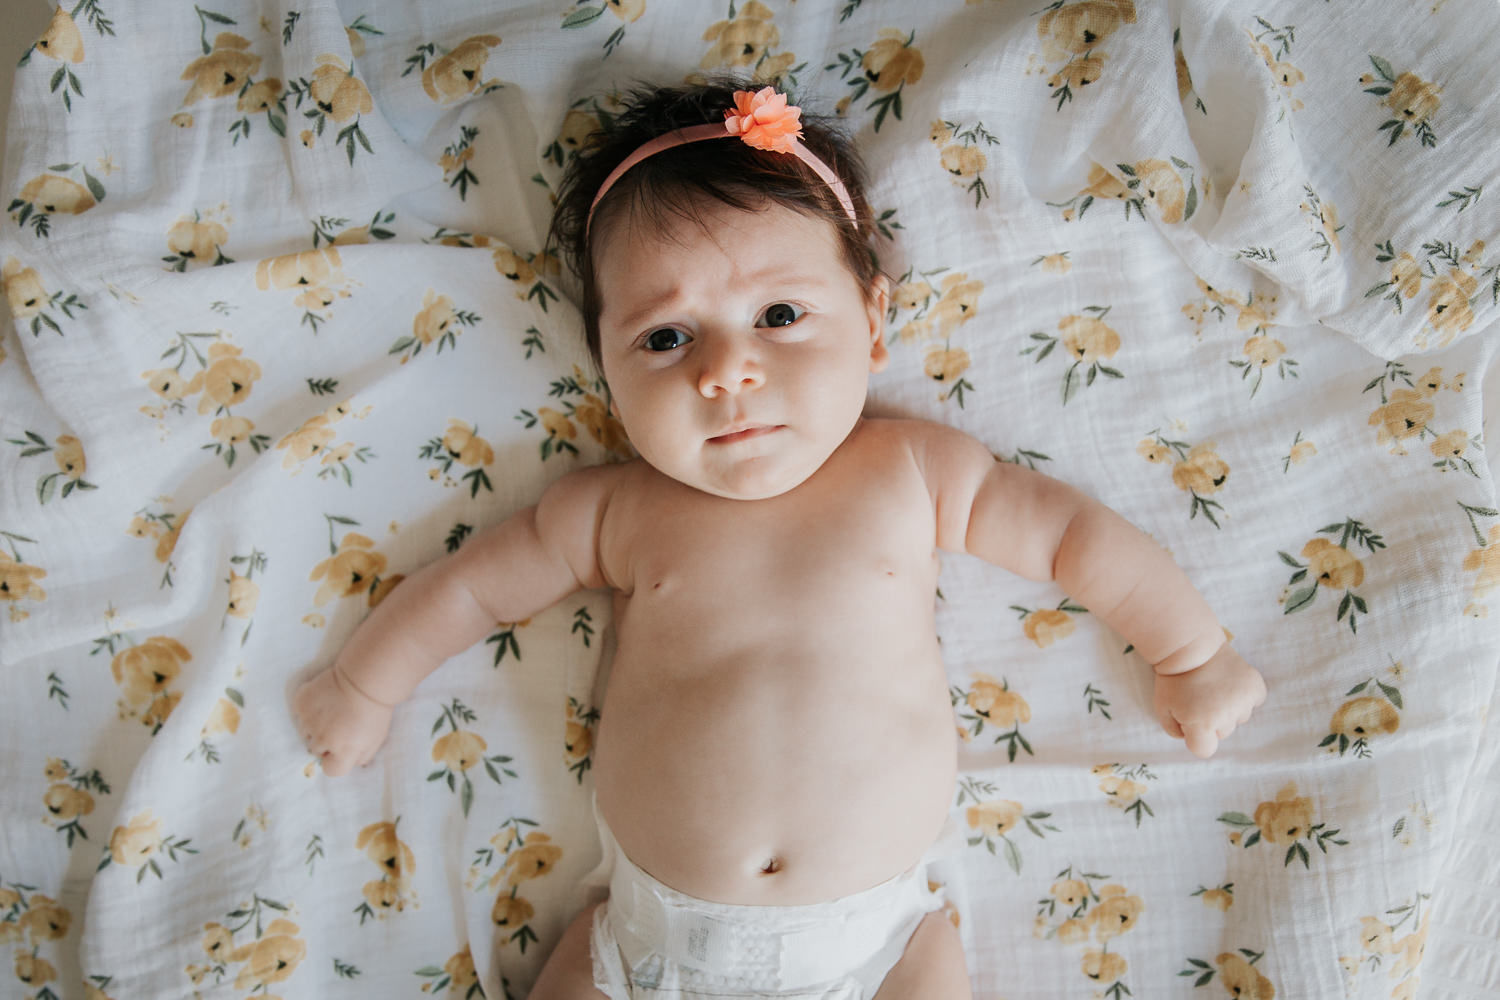 2 month old baby girl in diaper with lots of dark brown hair wearing headband lying on yellow floral blanket, looking perplexed - Newmarket Lifestyle Photography